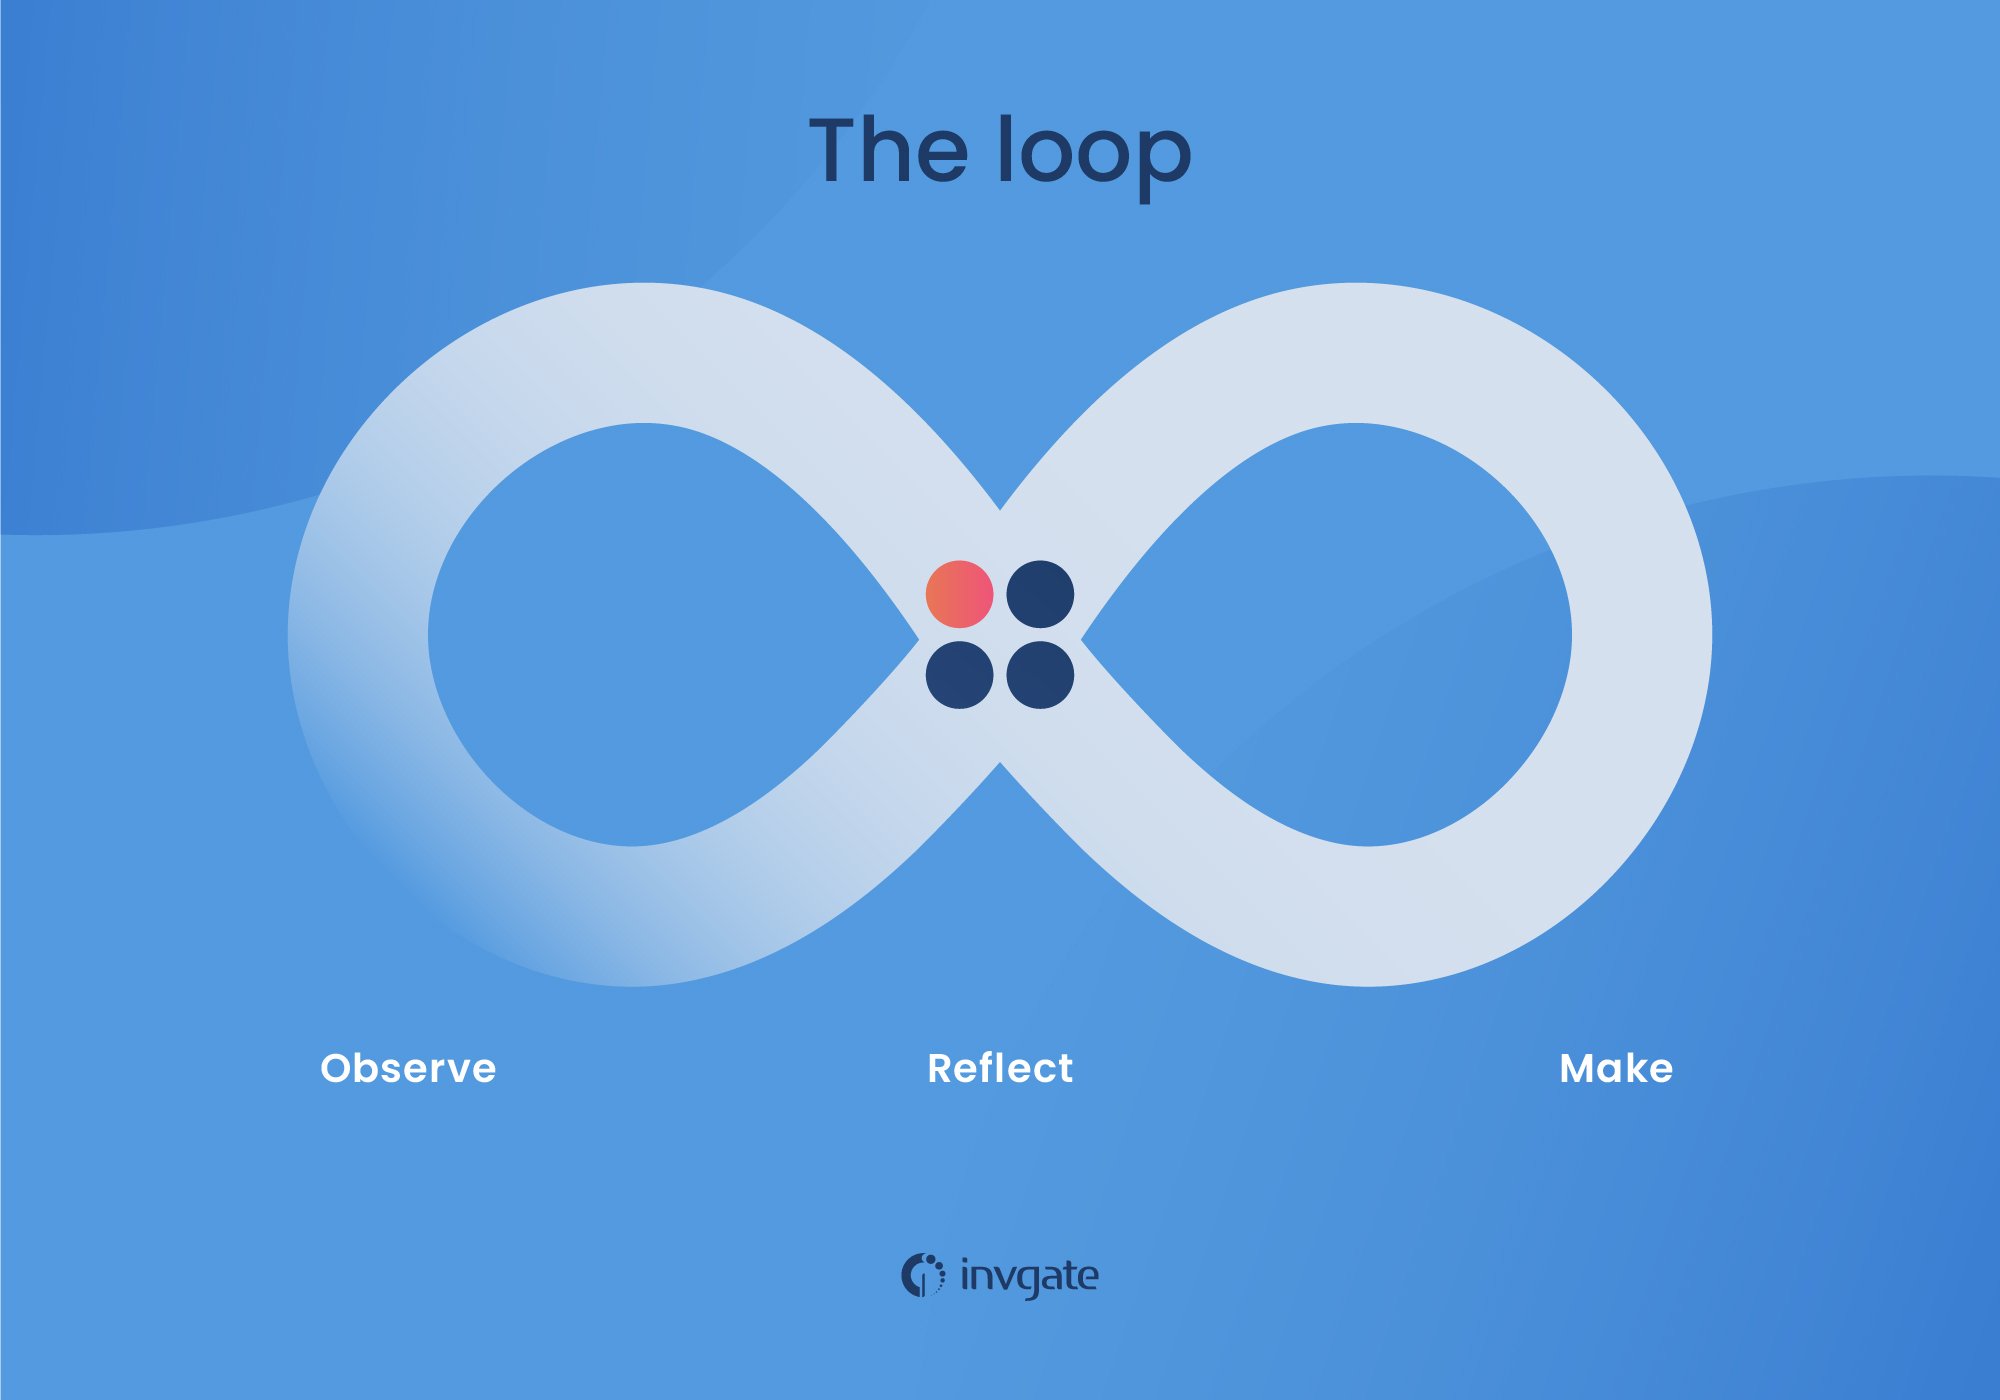 All the stages mentioned above are part of the loop, which is a never-ending cycle of observing, reflecting, and creating.